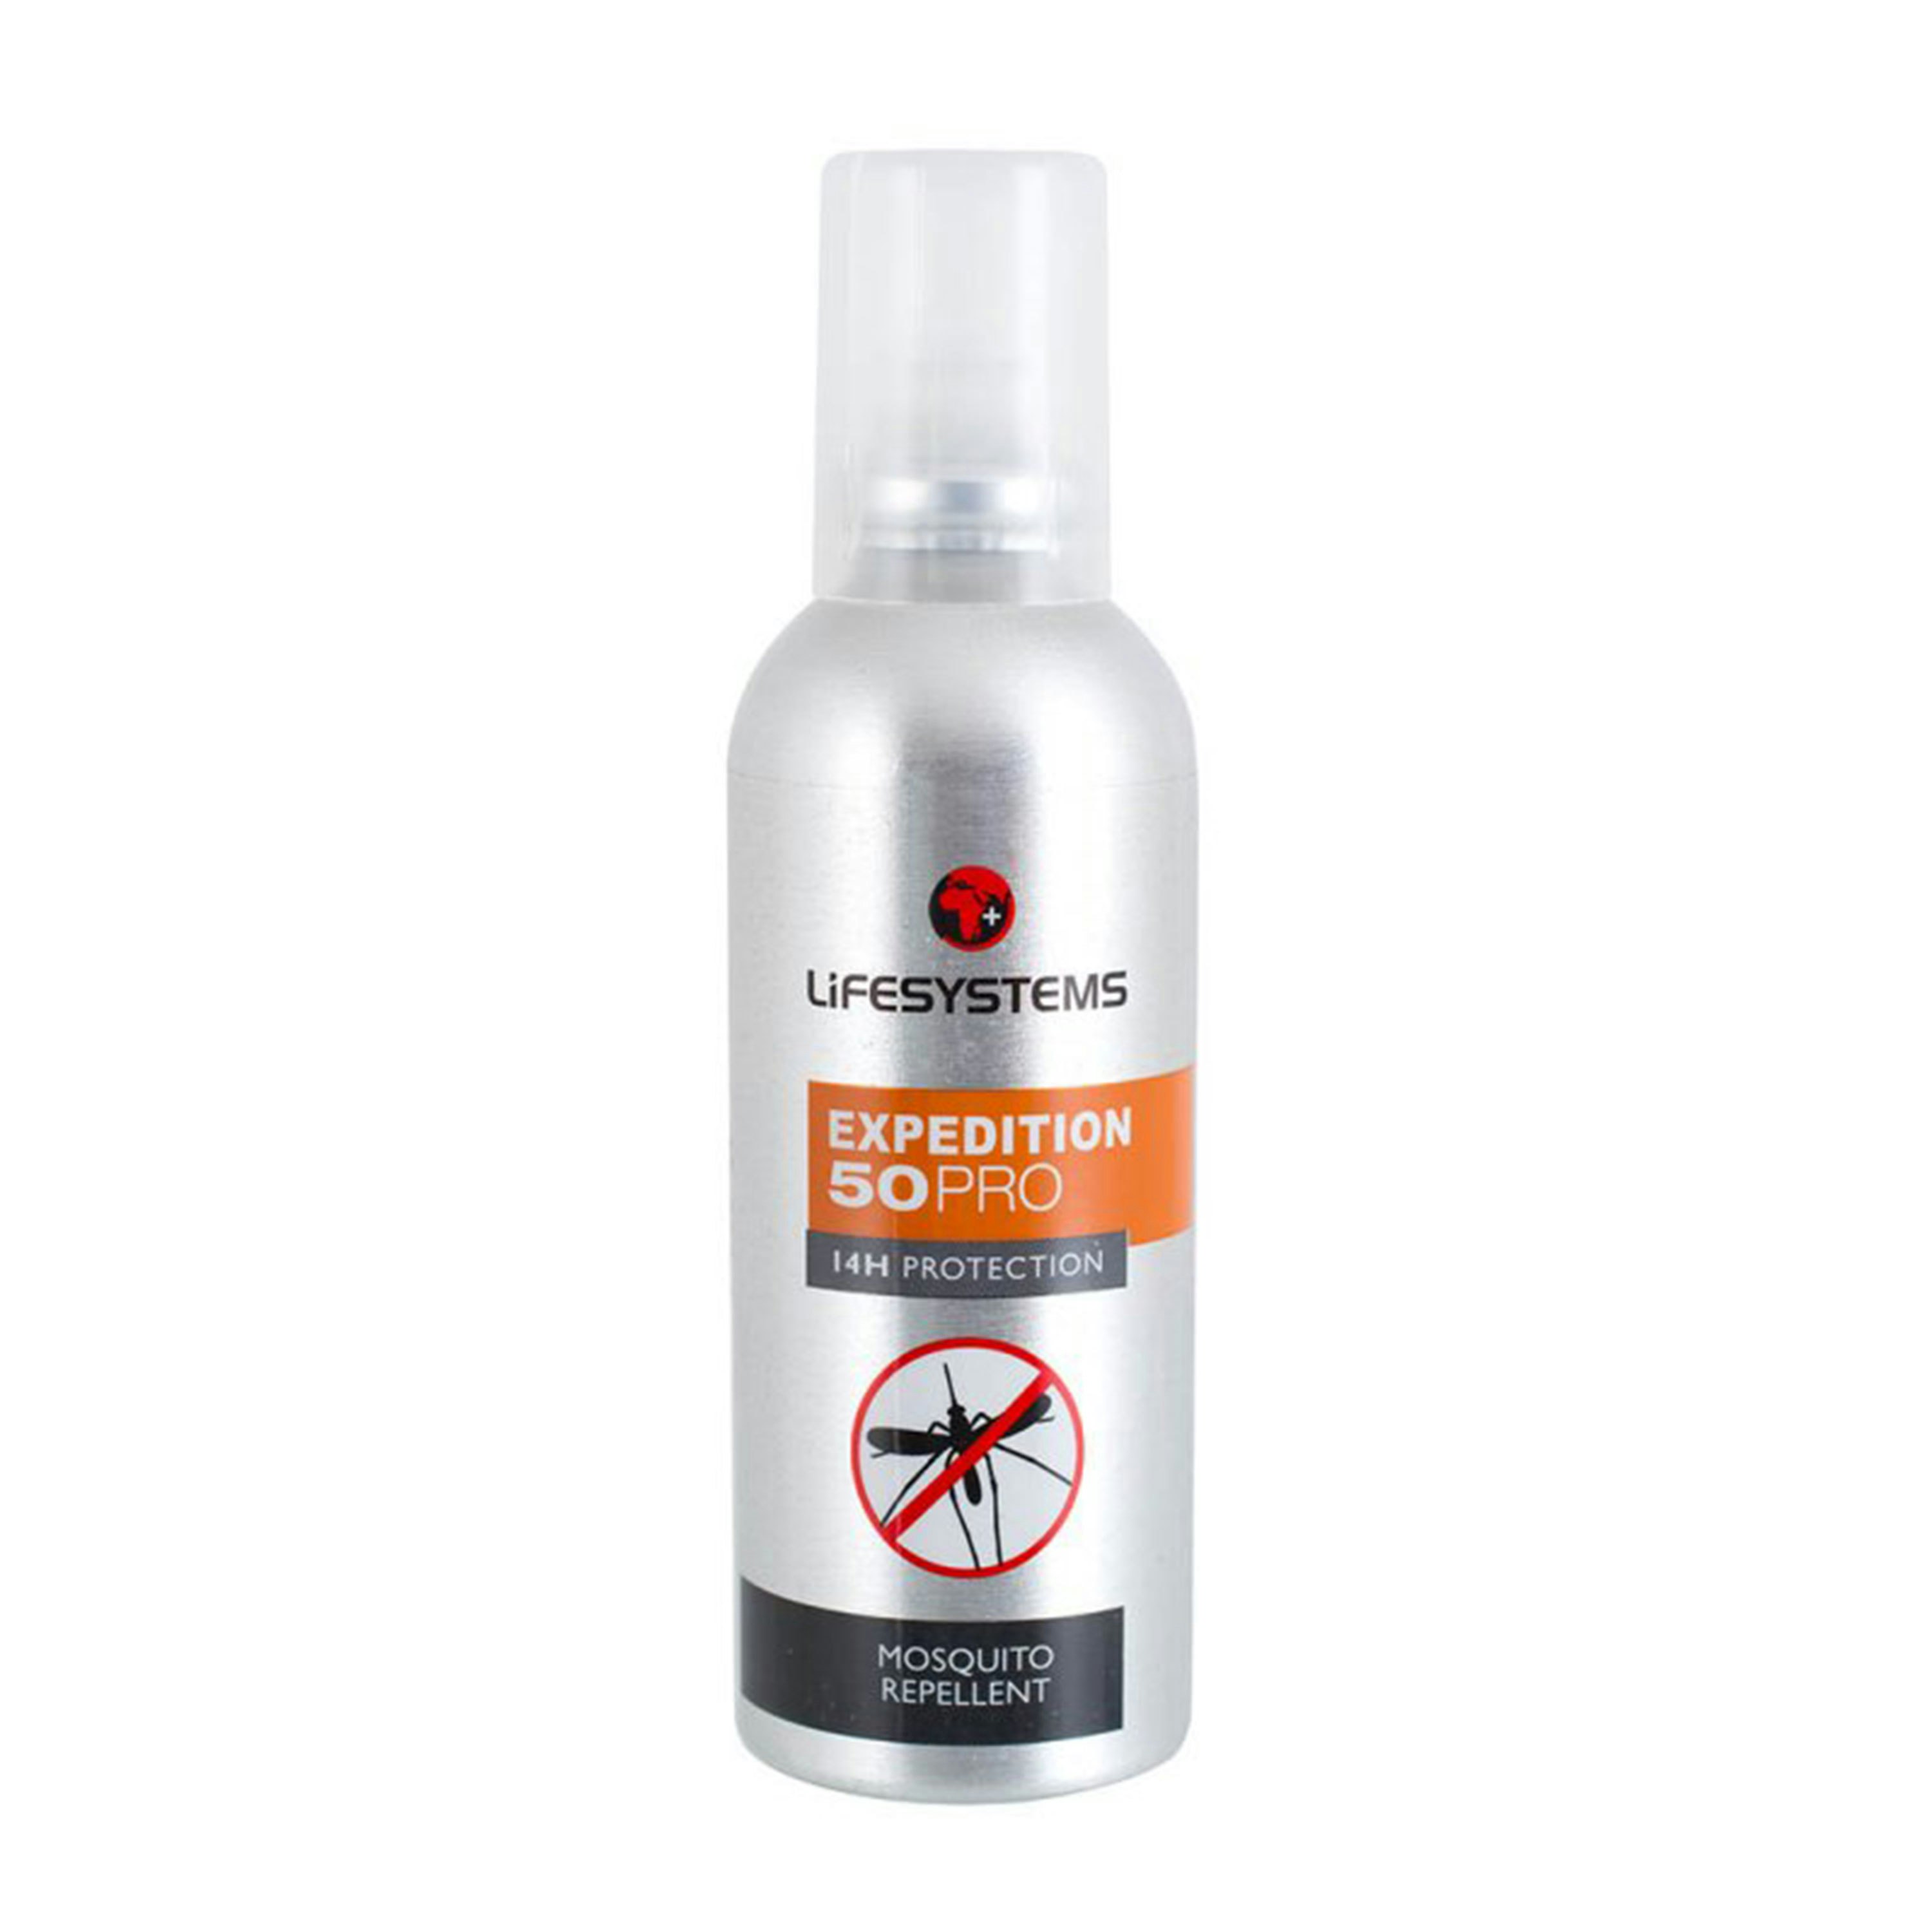 Lifesystems(r) Expedition 50 Pro DEET Mosquito Repellent 100ml